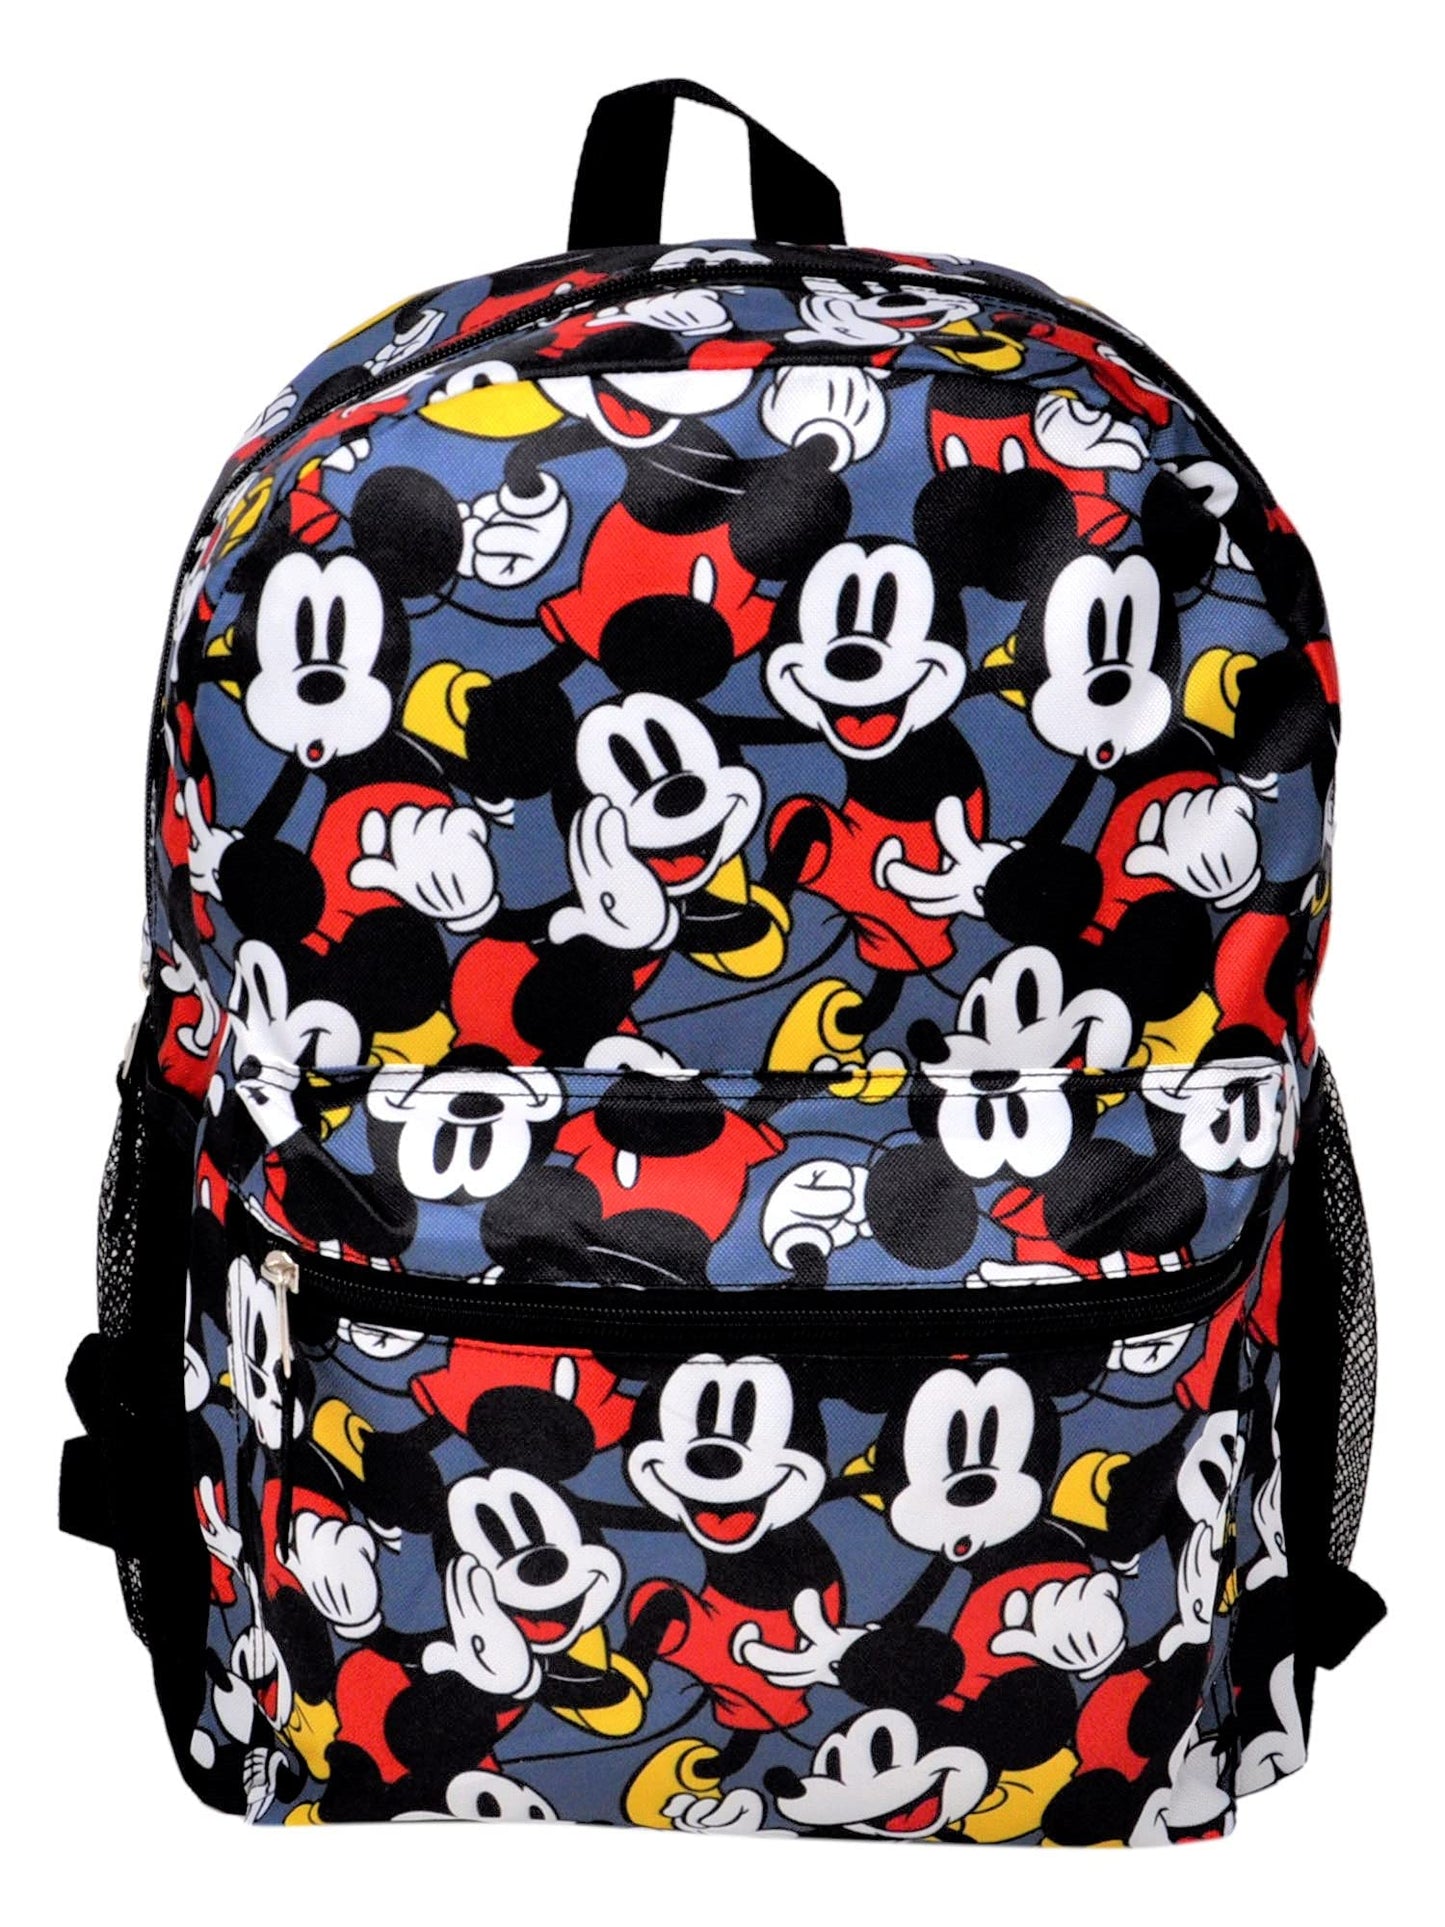 Disney Mickey Mouse 16" Backpack Bag All Over Print Cargo and Side Mesh Pockets